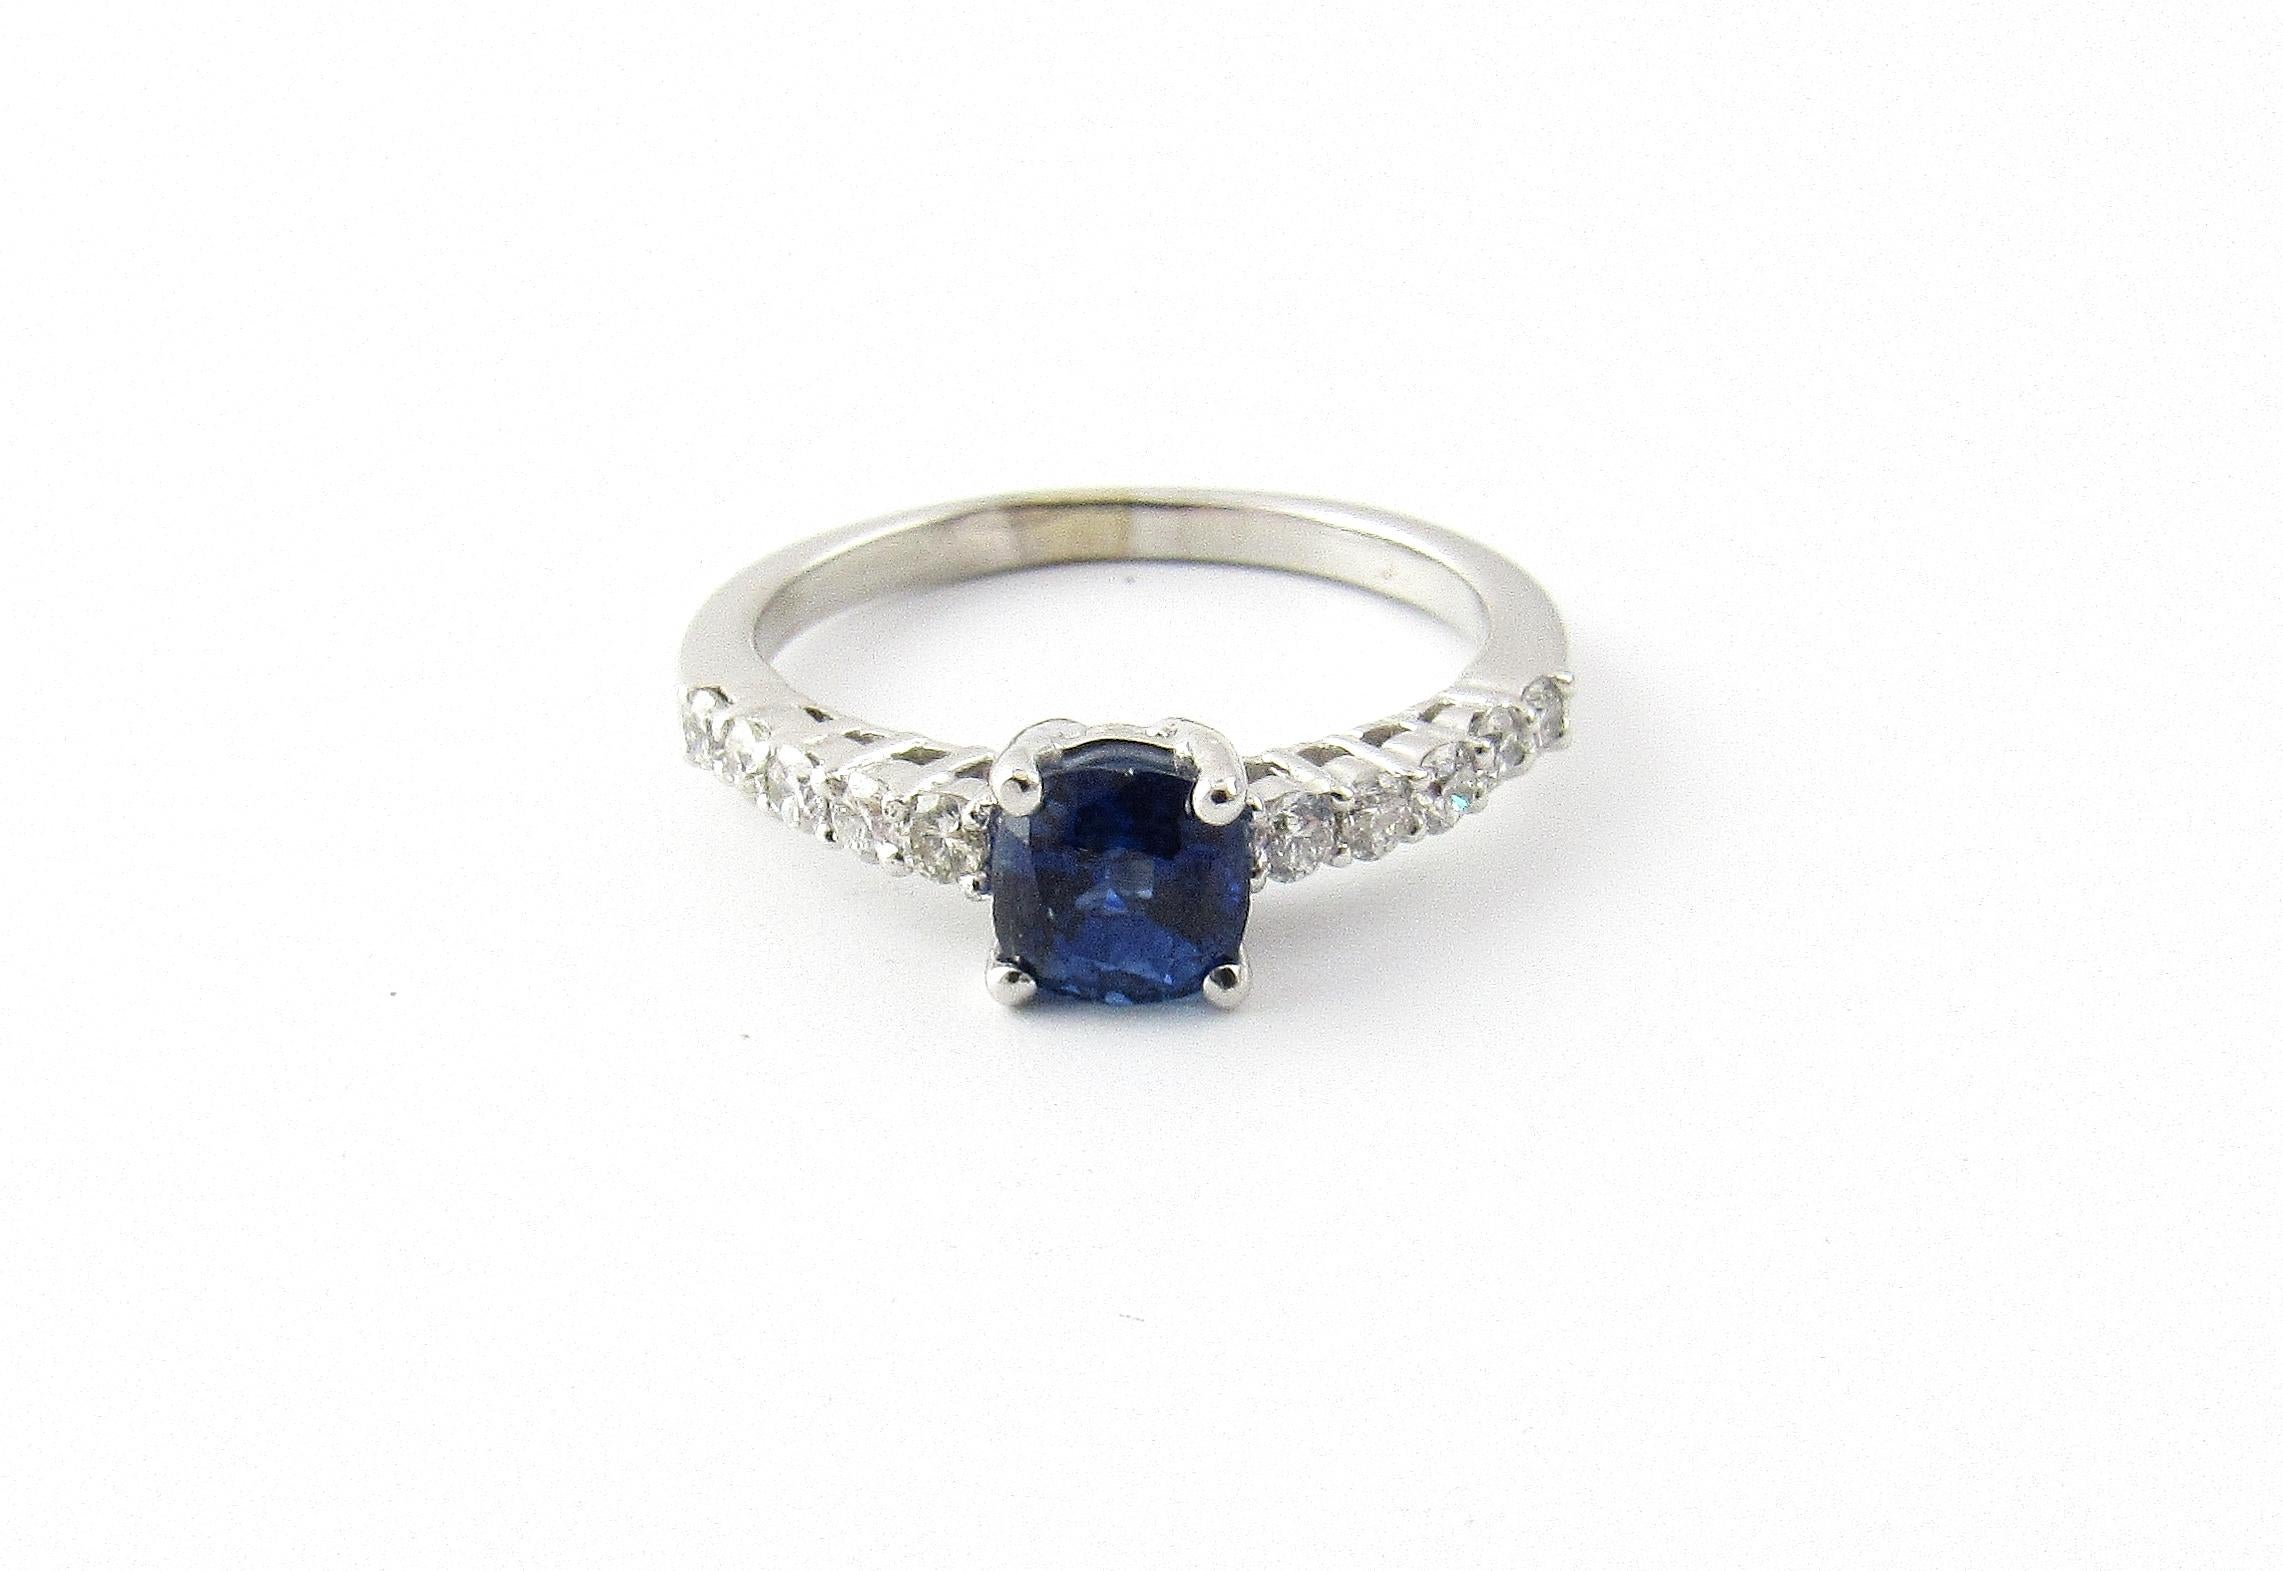 Vintage 18 Karat White Gold Sapphire and Diamond Ring Size 6.5-

This lovely ring features one round sapphire (5 mm) accented with ten round brilliant cut diamonds set in classic 18K white gold. Shank: 2 mm.

Approximate total diamond weight: .20